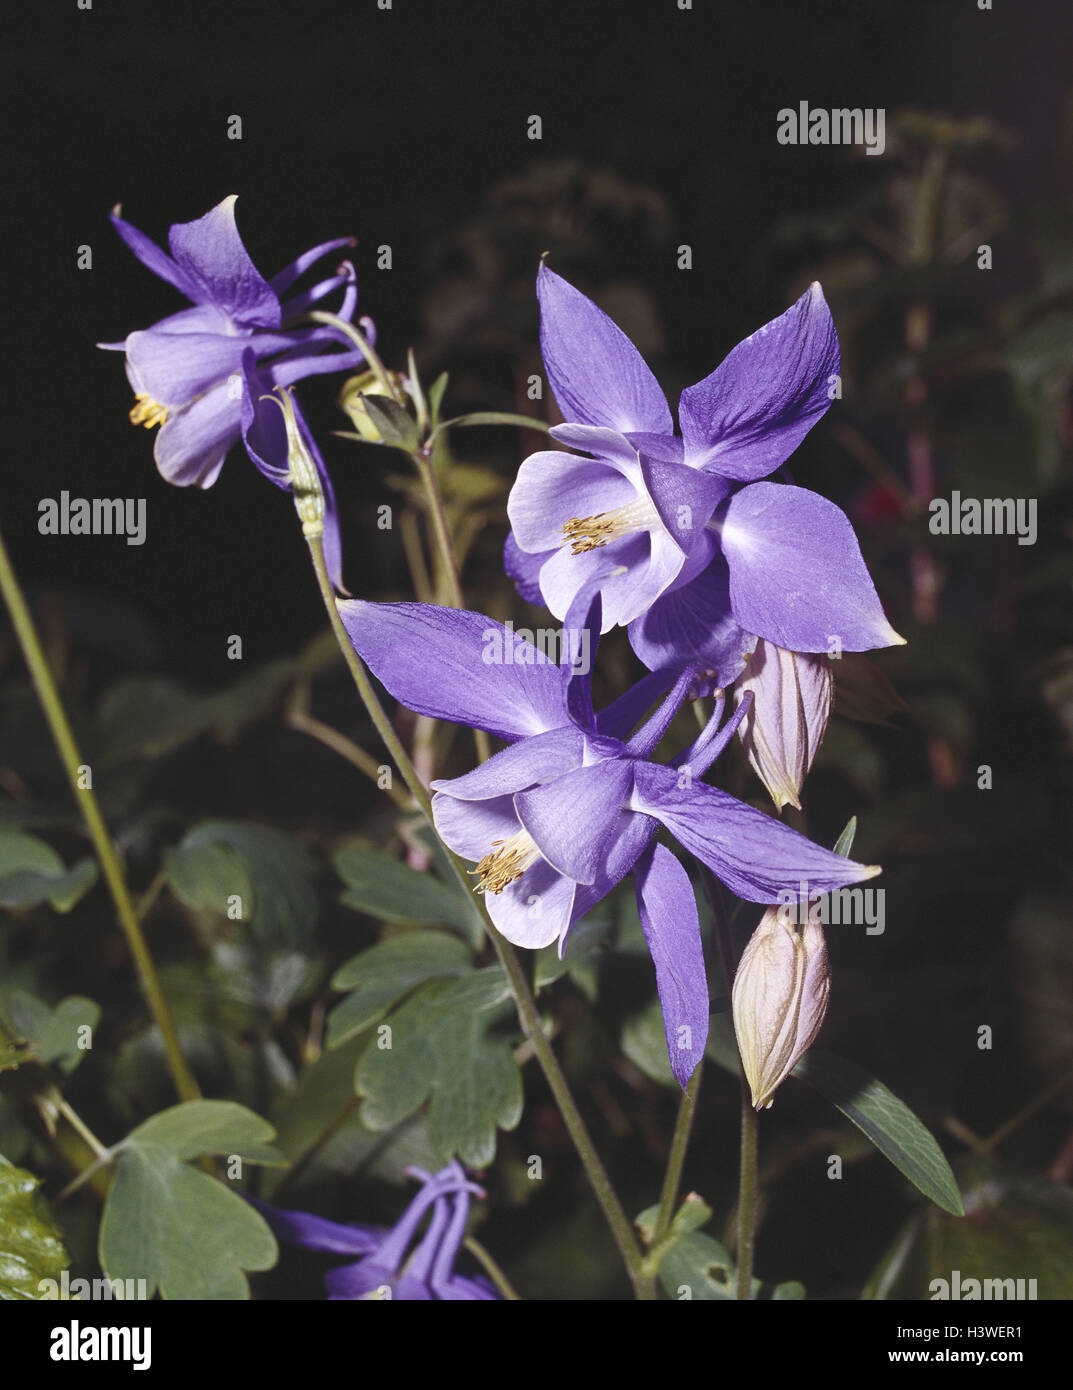 Alp aquilegia, Aquilegia alpina, close up, nature, botany, flora, plants, flowers, Alpine flowers, Alpine flora, alp aquilegia, aquilegia, Aquilegia, protected plant, crowfoot plants, 'water collector', blossoms, blossom, blue-violet, period bloom from Ma Stock Photo